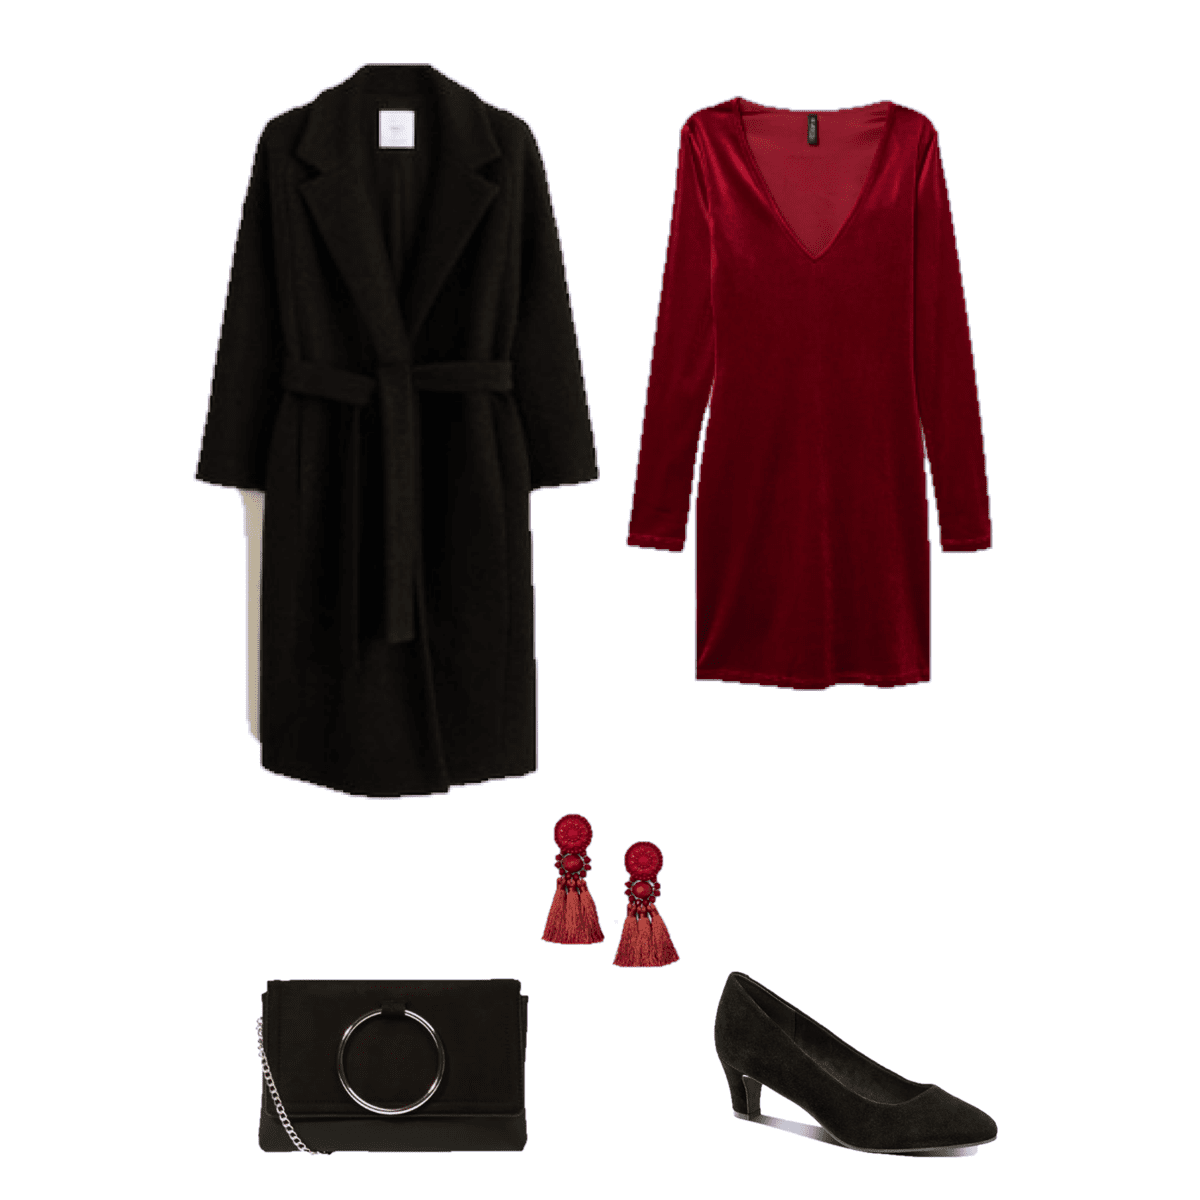 New Year's Eve: 6 looks for 5 different Occasions - womenontrend